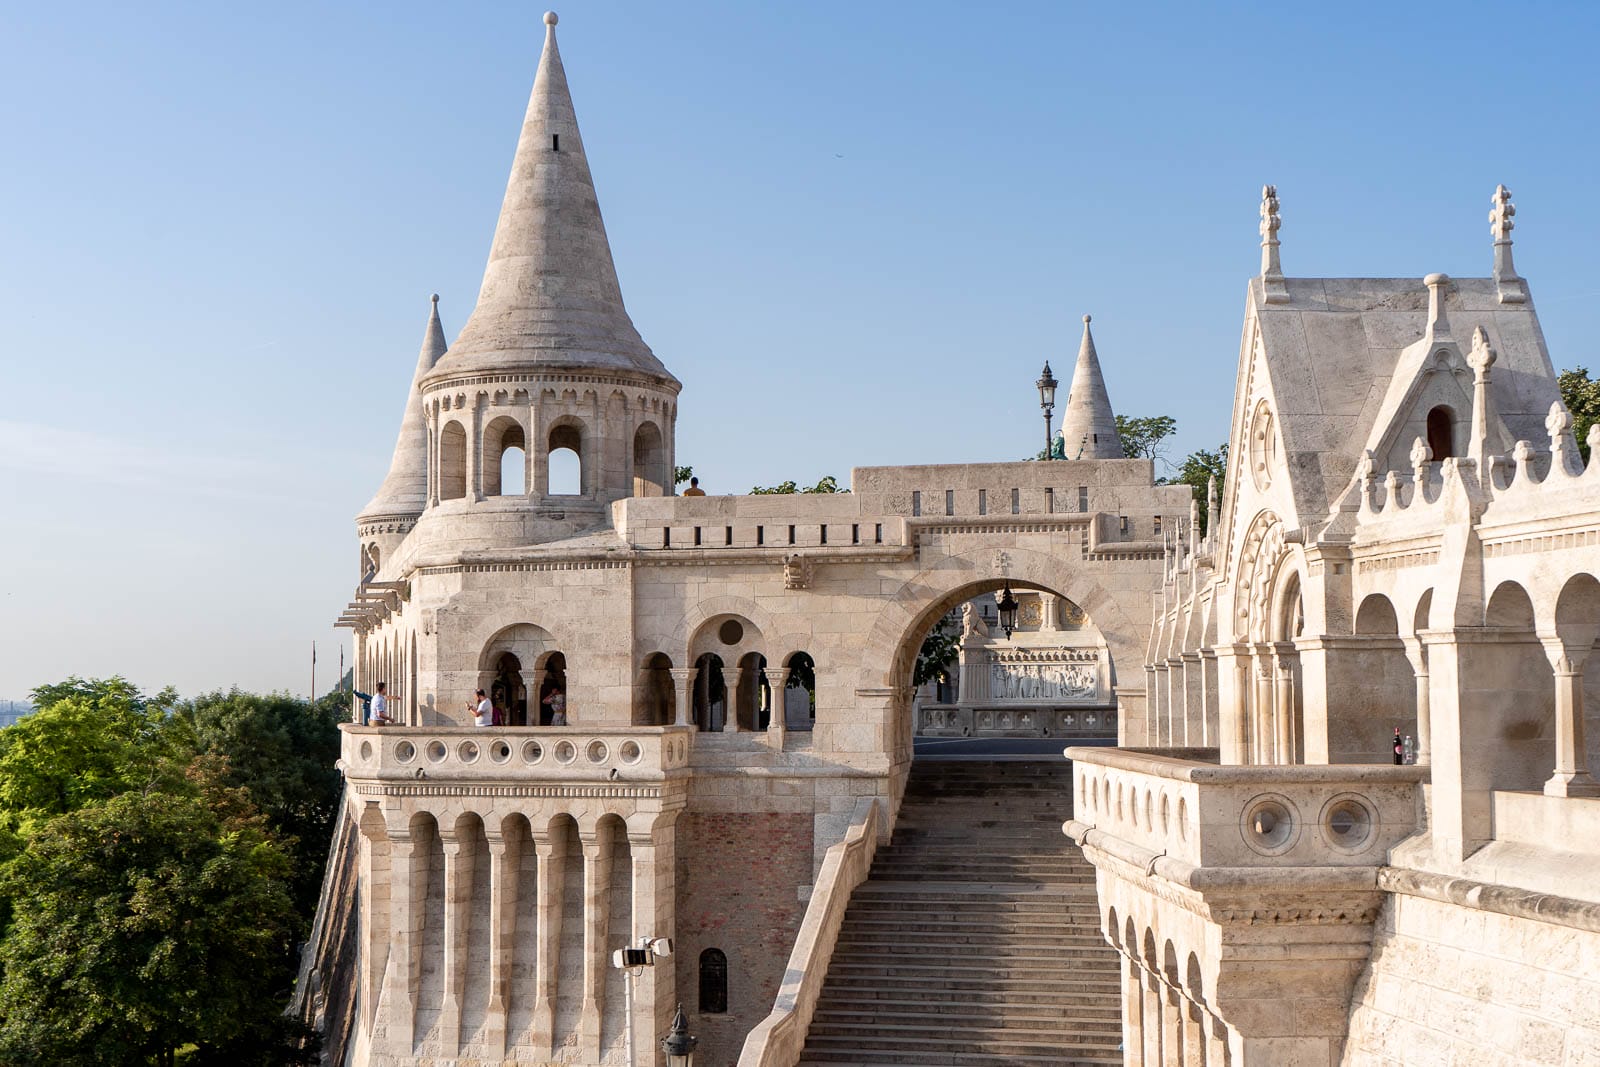 The fairytale looking Fisherman's Bastion in Budapest, Hungary